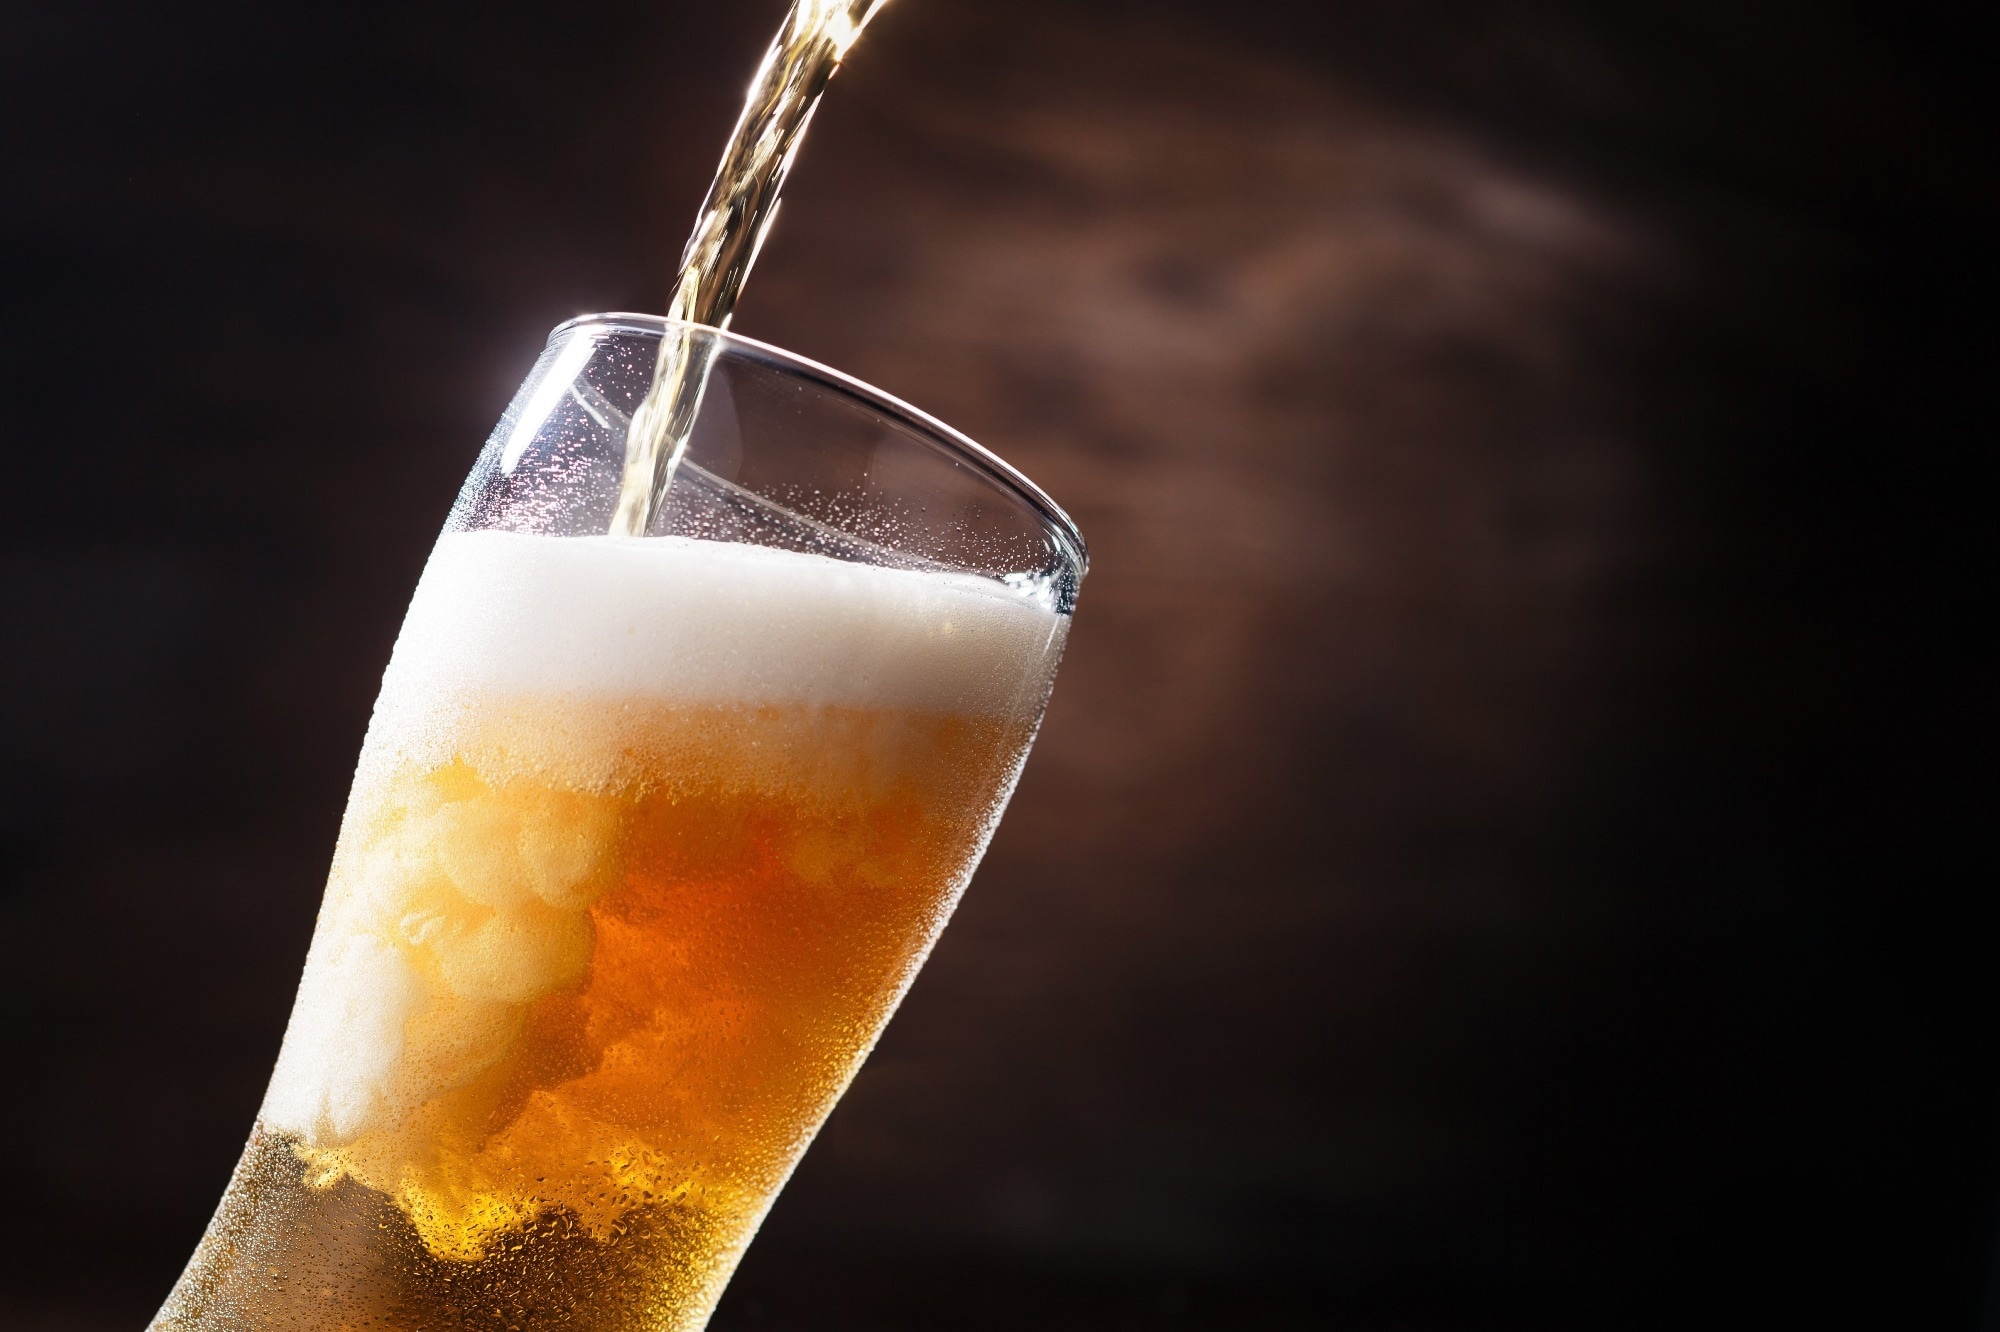 Study: Formononetin, a Beer Polyphenol with Catabolic Effects on Chondrocytes. Image Credit: Natural Box / Shutterstock.com